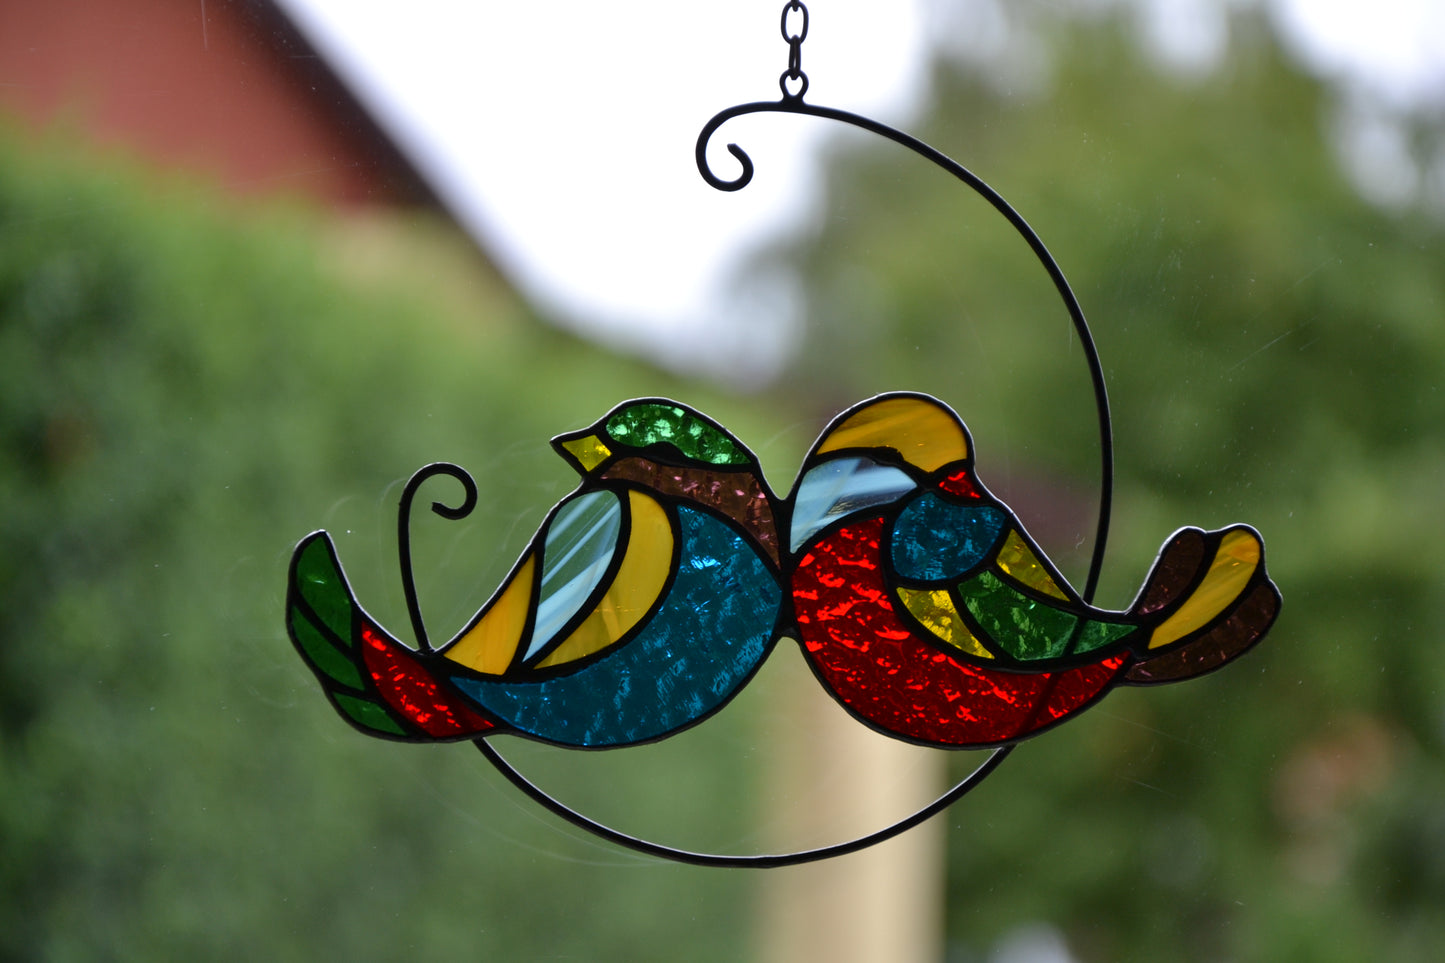 Suncatcher Two birds on branch stained glass window hanging Stain glass suncatcher Glass decor Friendly gift Wall decor